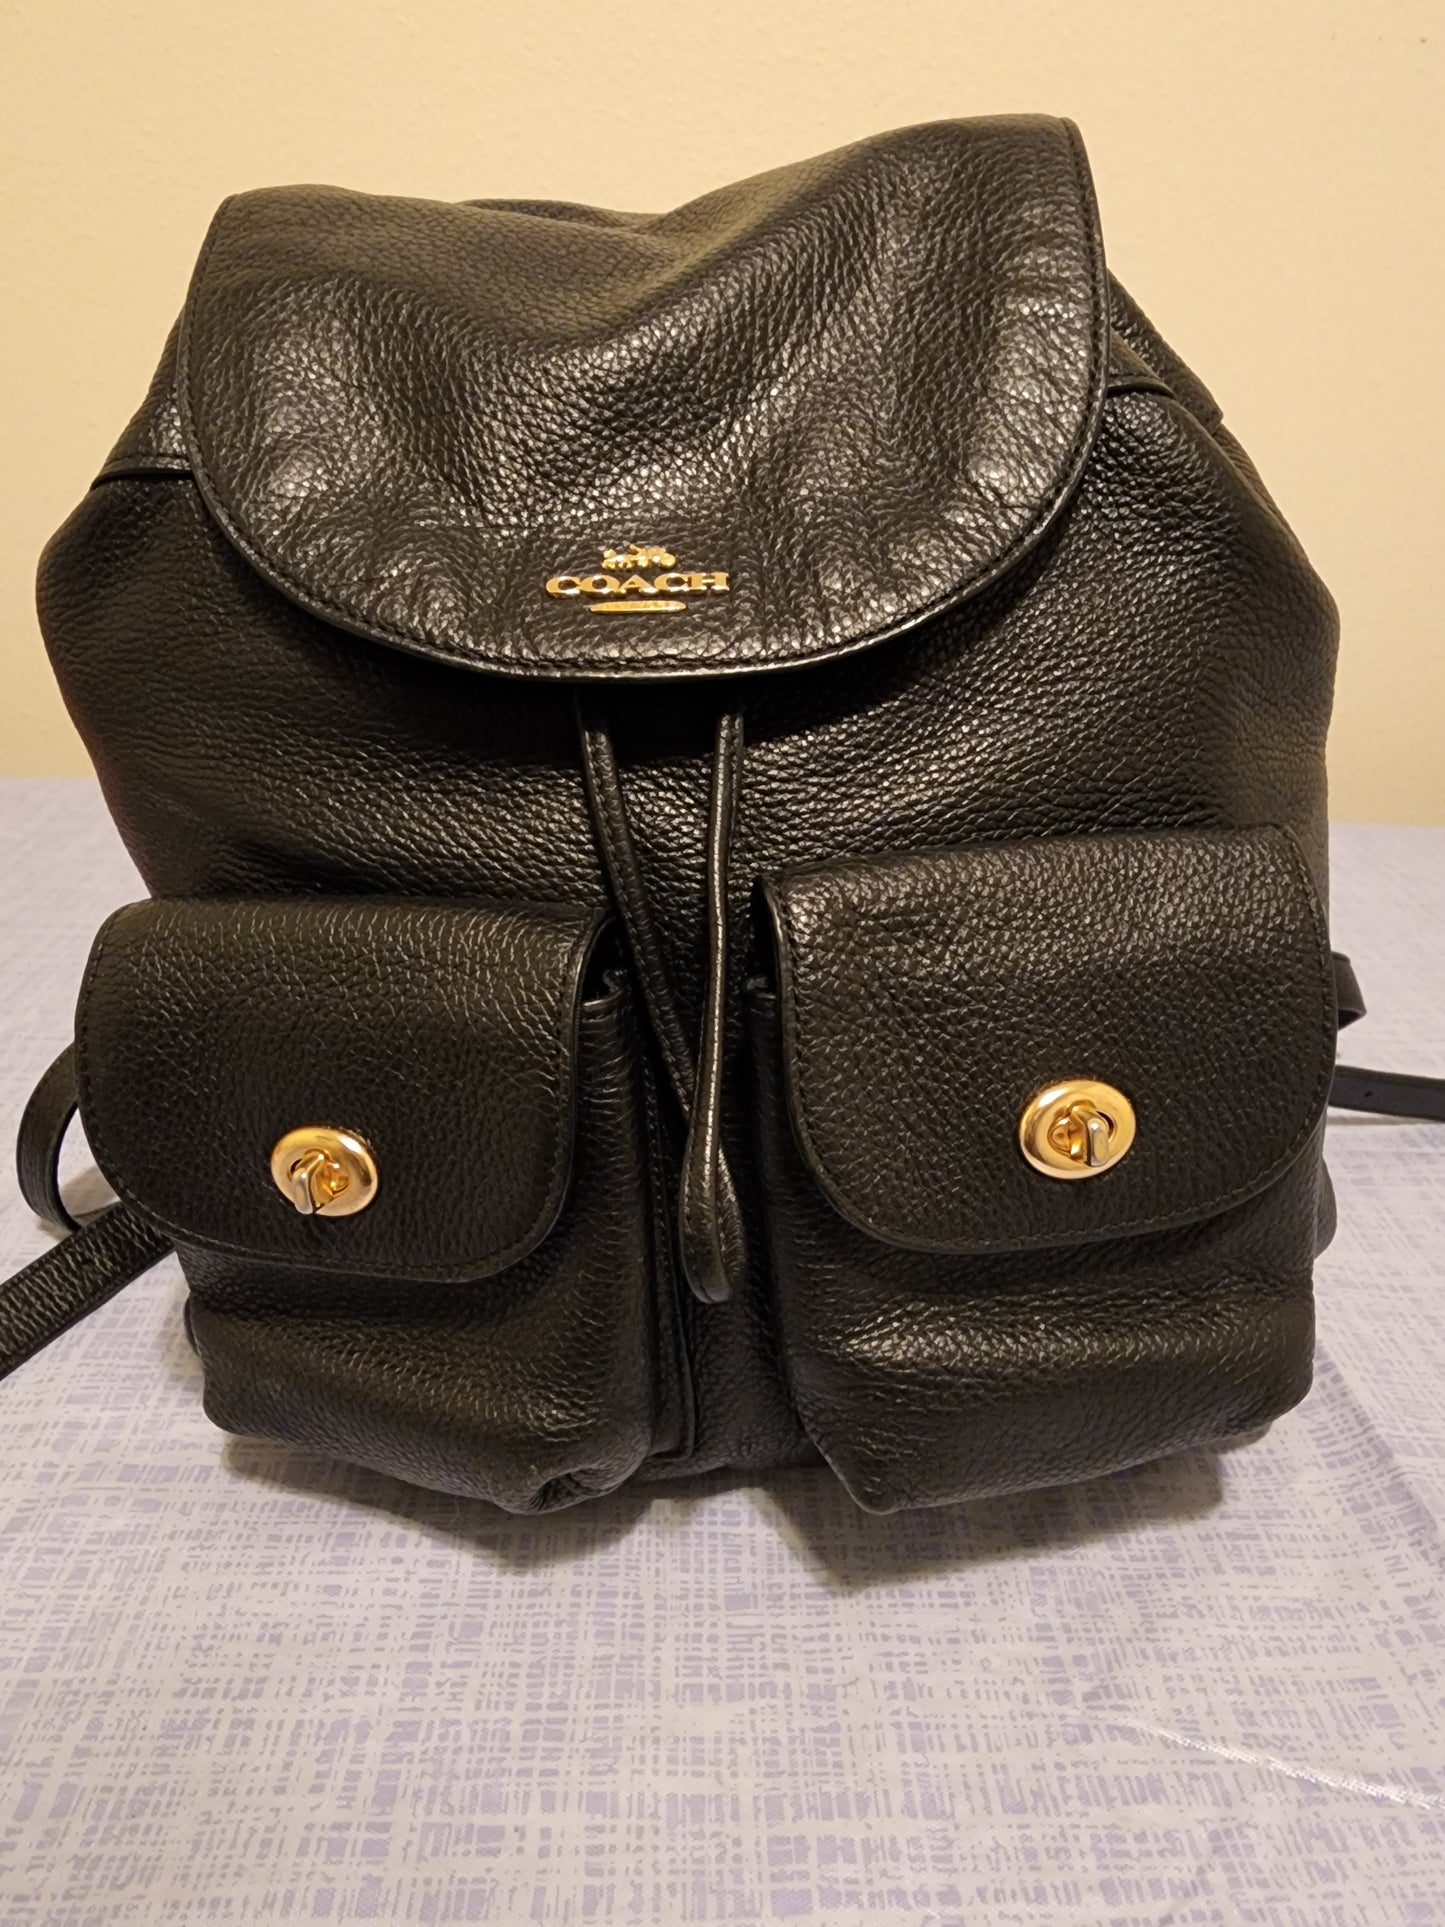 25% Off In Cart Limited Time Only! Used Coach 6145 Pennie Backpack